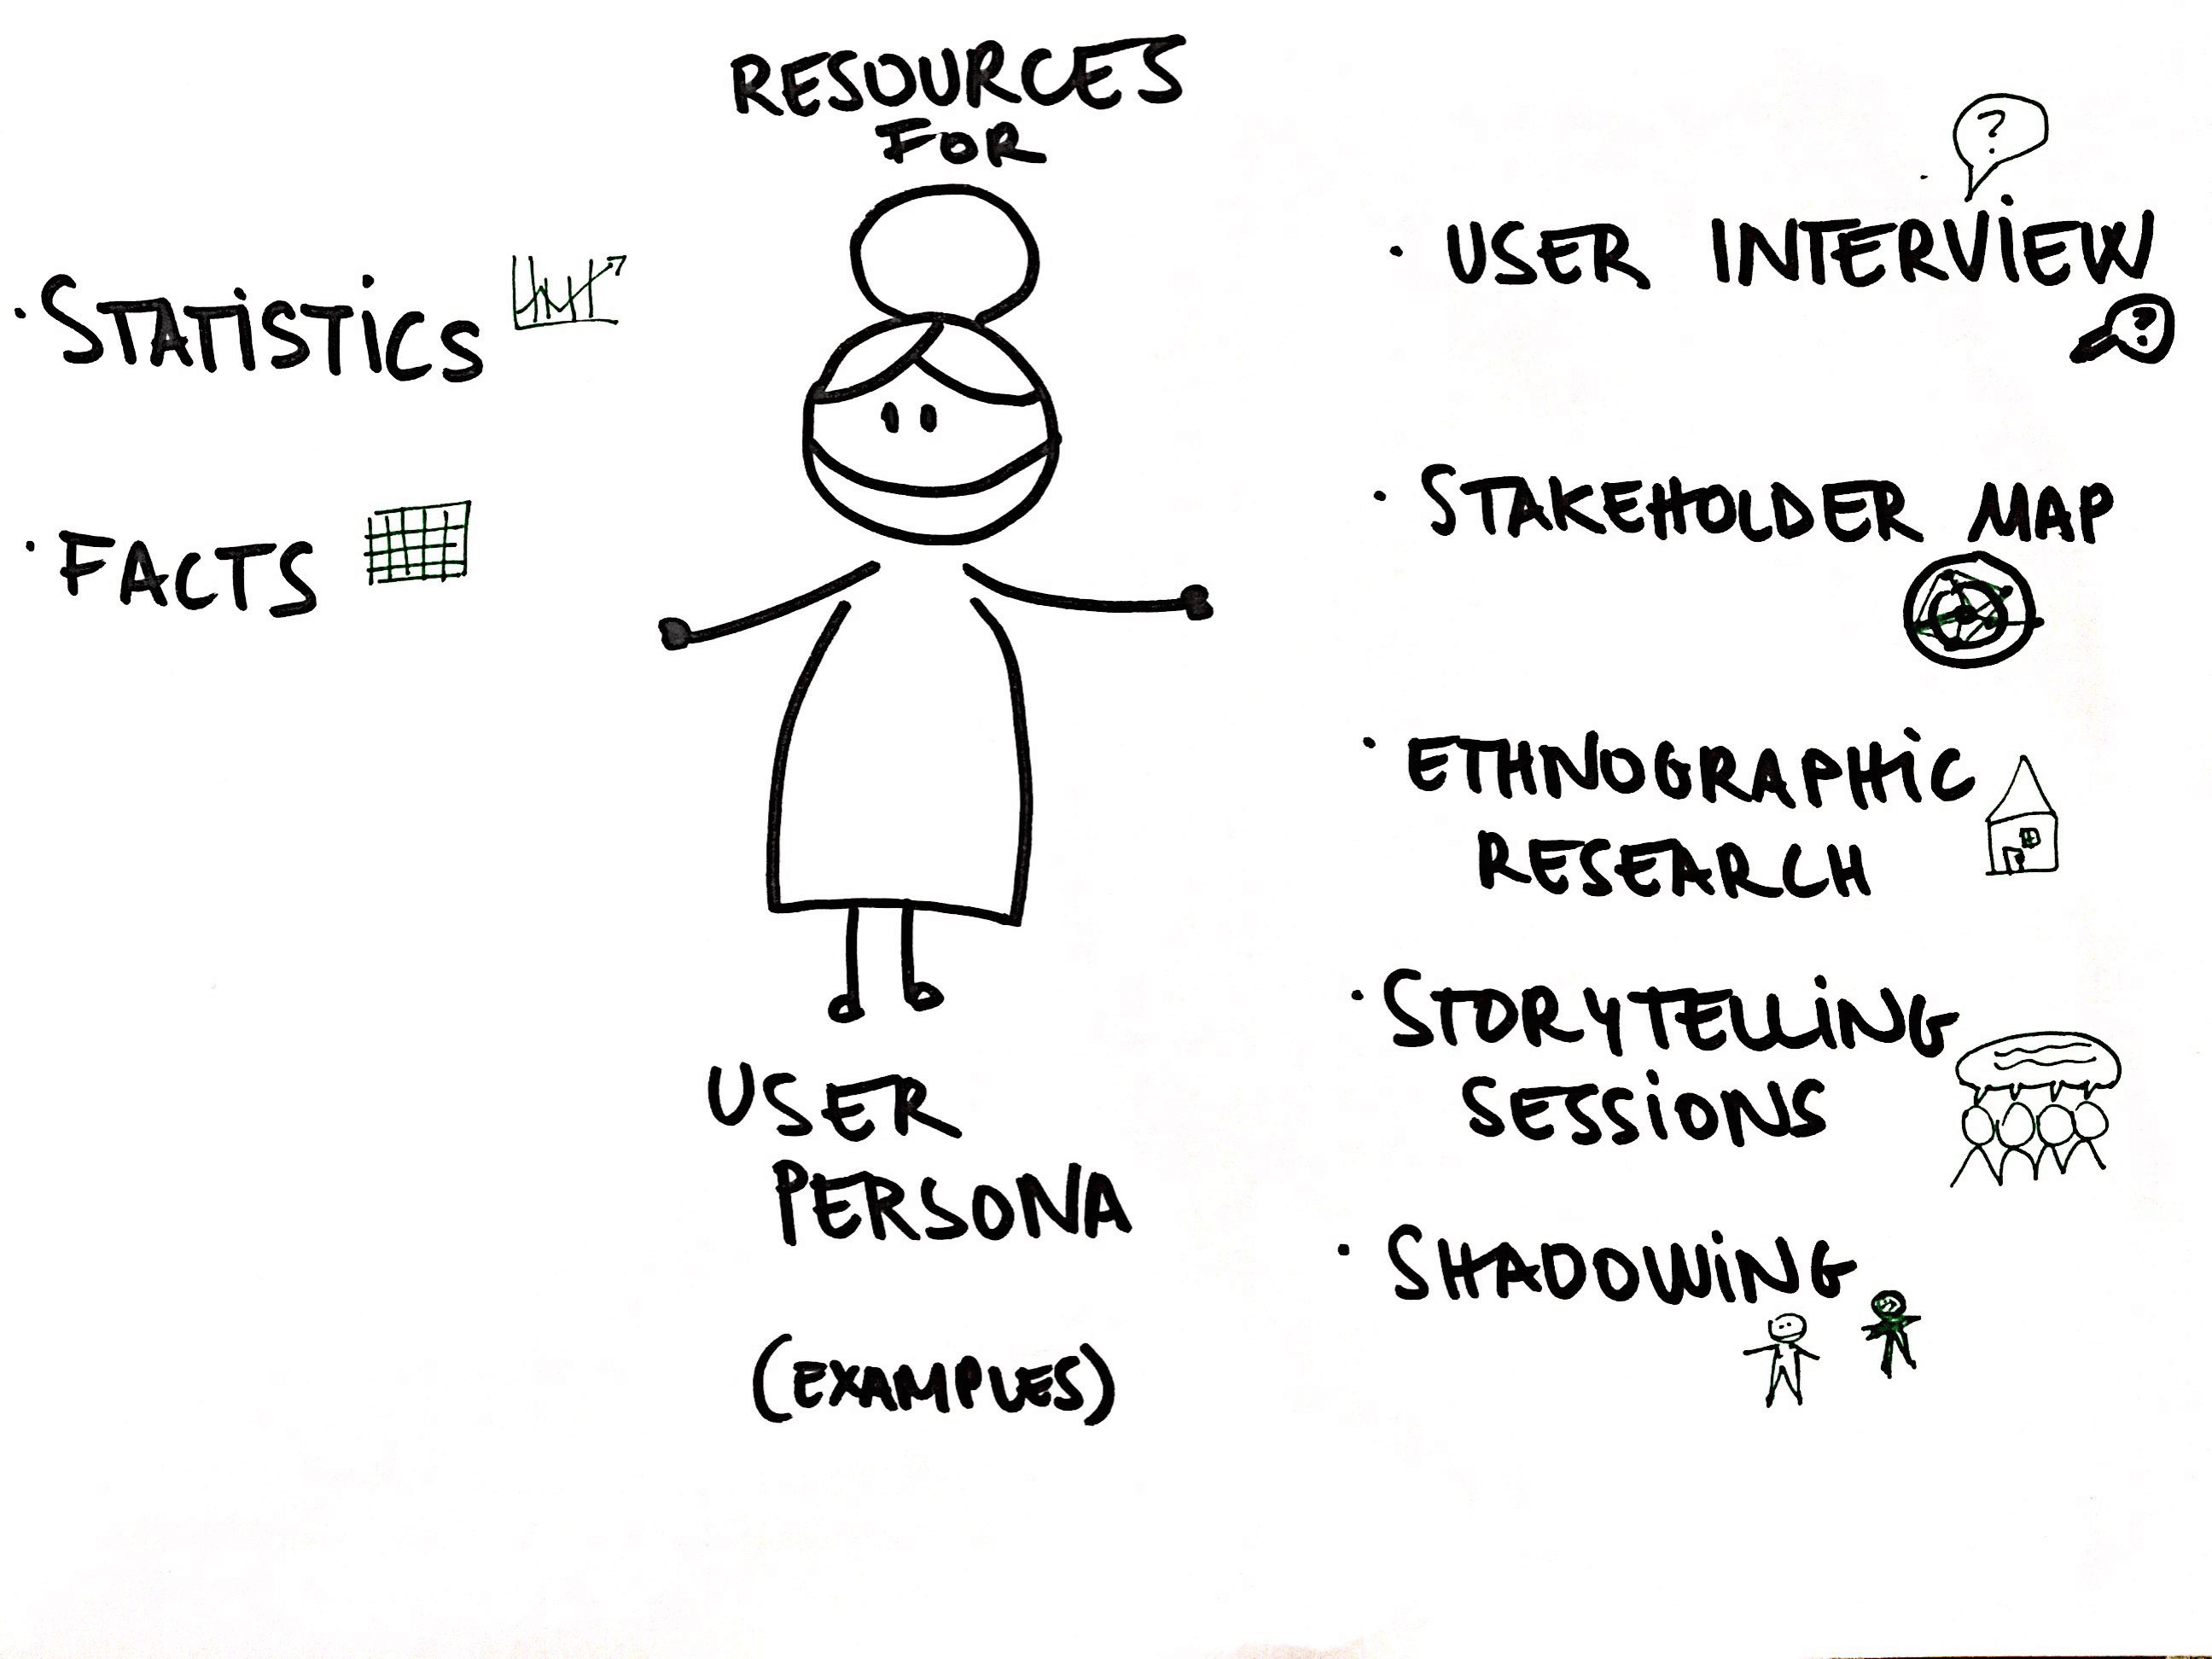 How to build a user personas